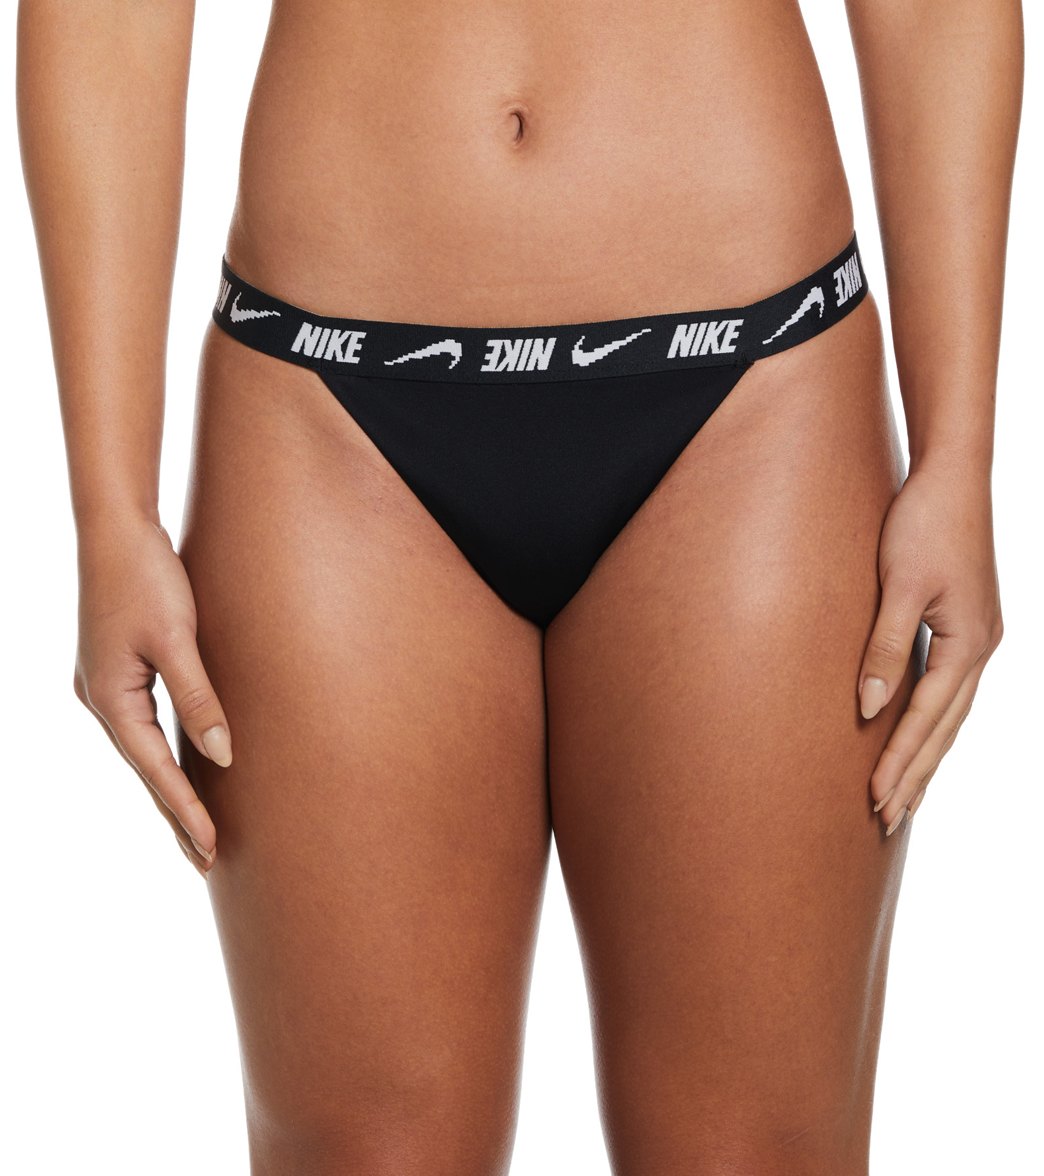 nike thong panties - OFF-58% >Free Delivery